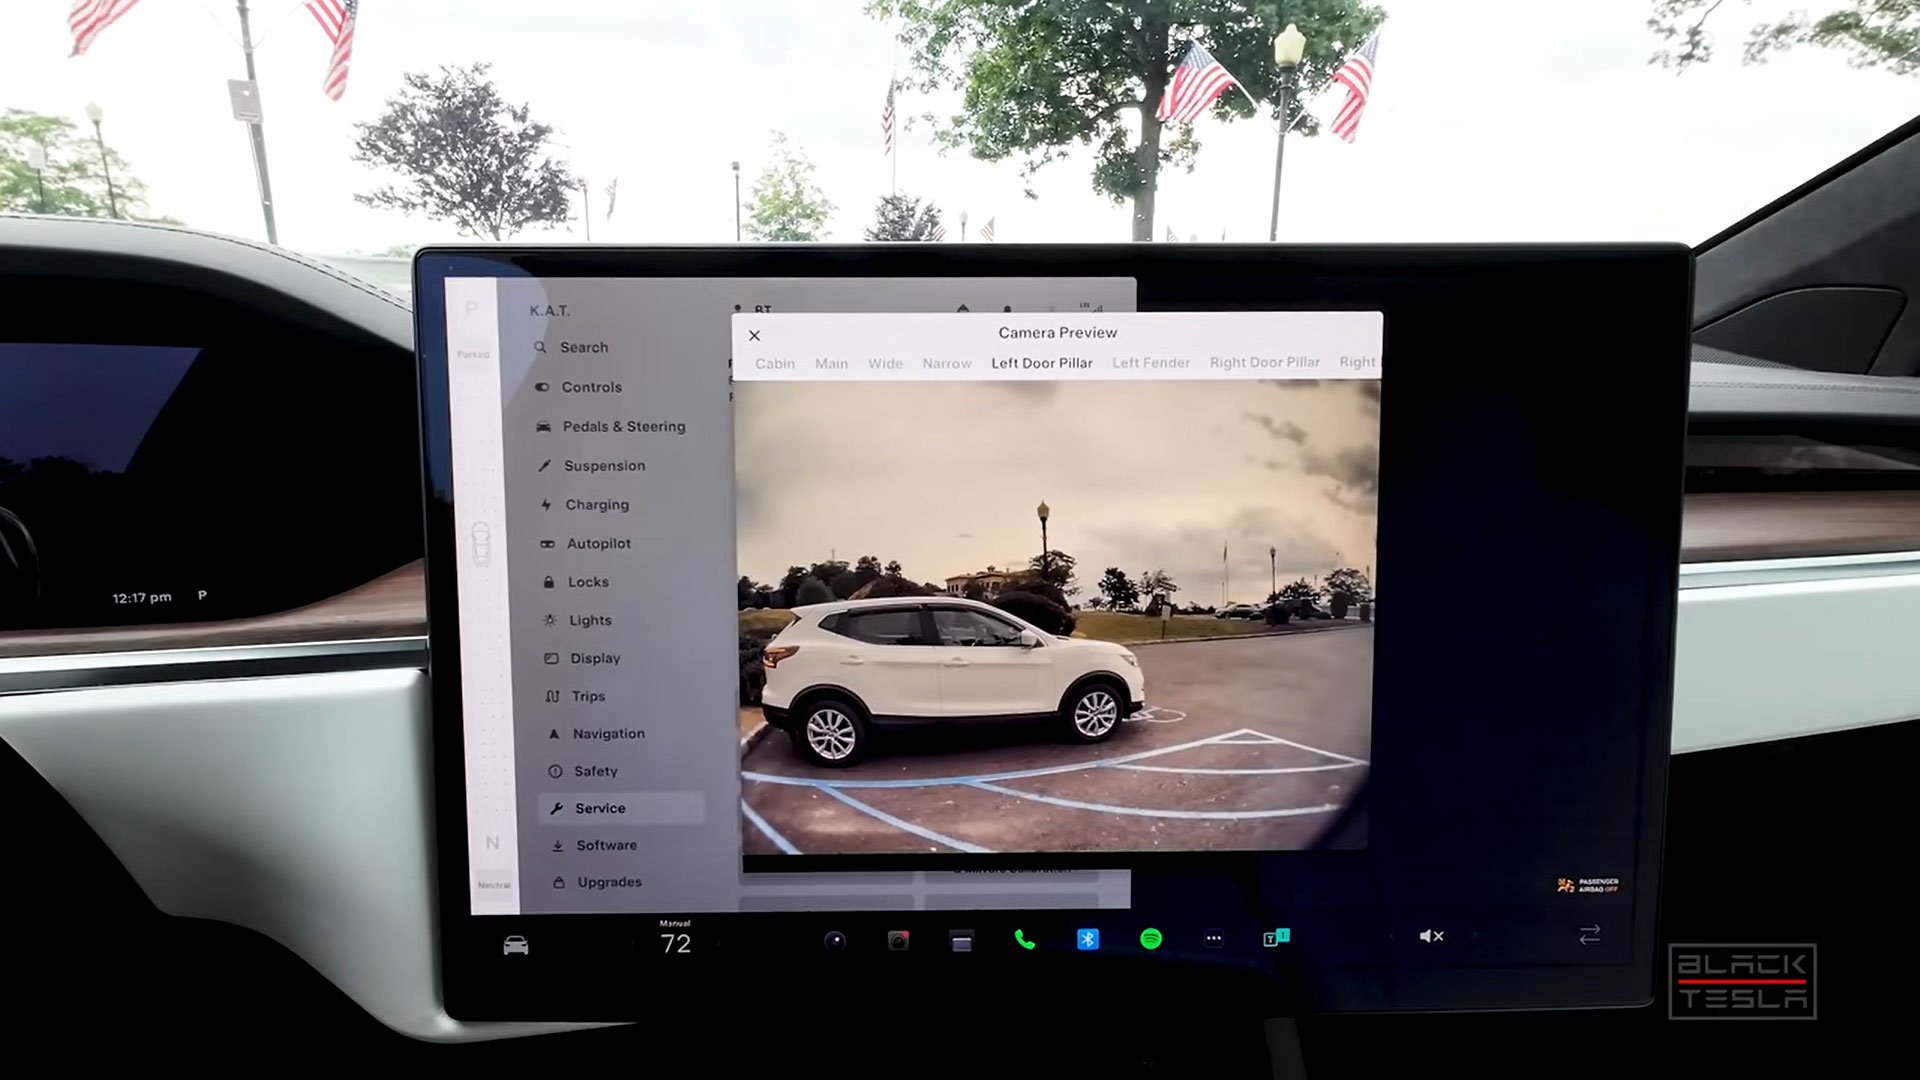 Tesla adds Camera Preview feature and new TPMS info in software